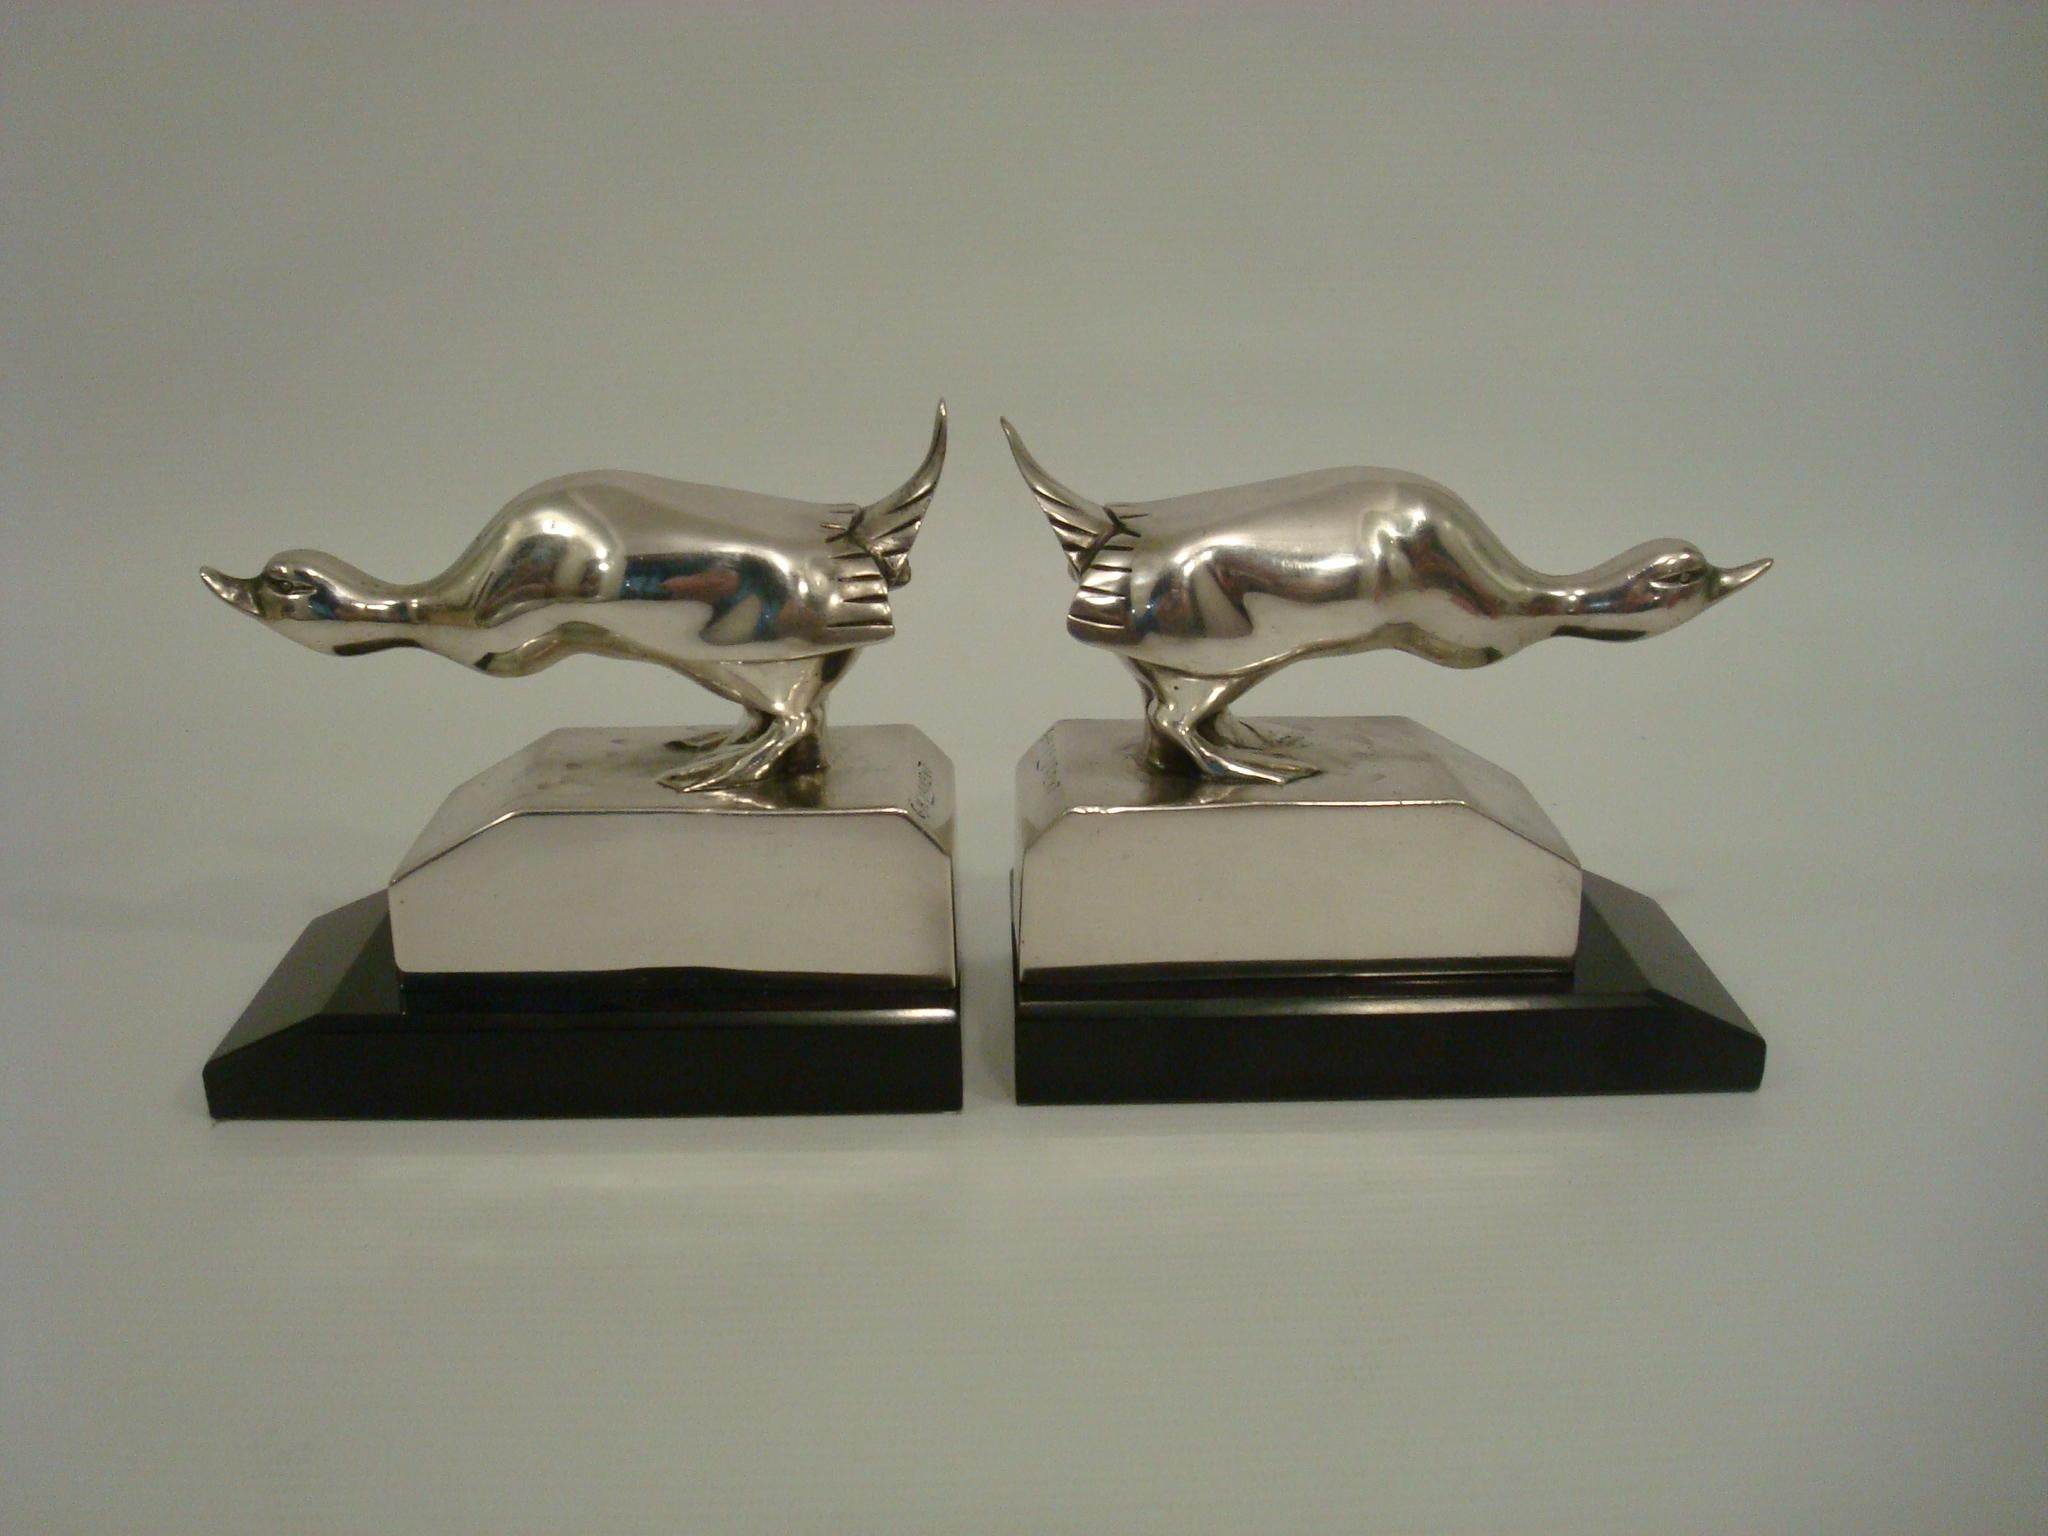 Art Deco silvered bronze duck bookends G.H. Laurent France 1925.
Pair of Art Deco silvered bronze bookends by the famous French artist G.H. Laurent. Signed and numbered, circa 1925. France.
This pair is illustrated in the book: “Art Deco and other